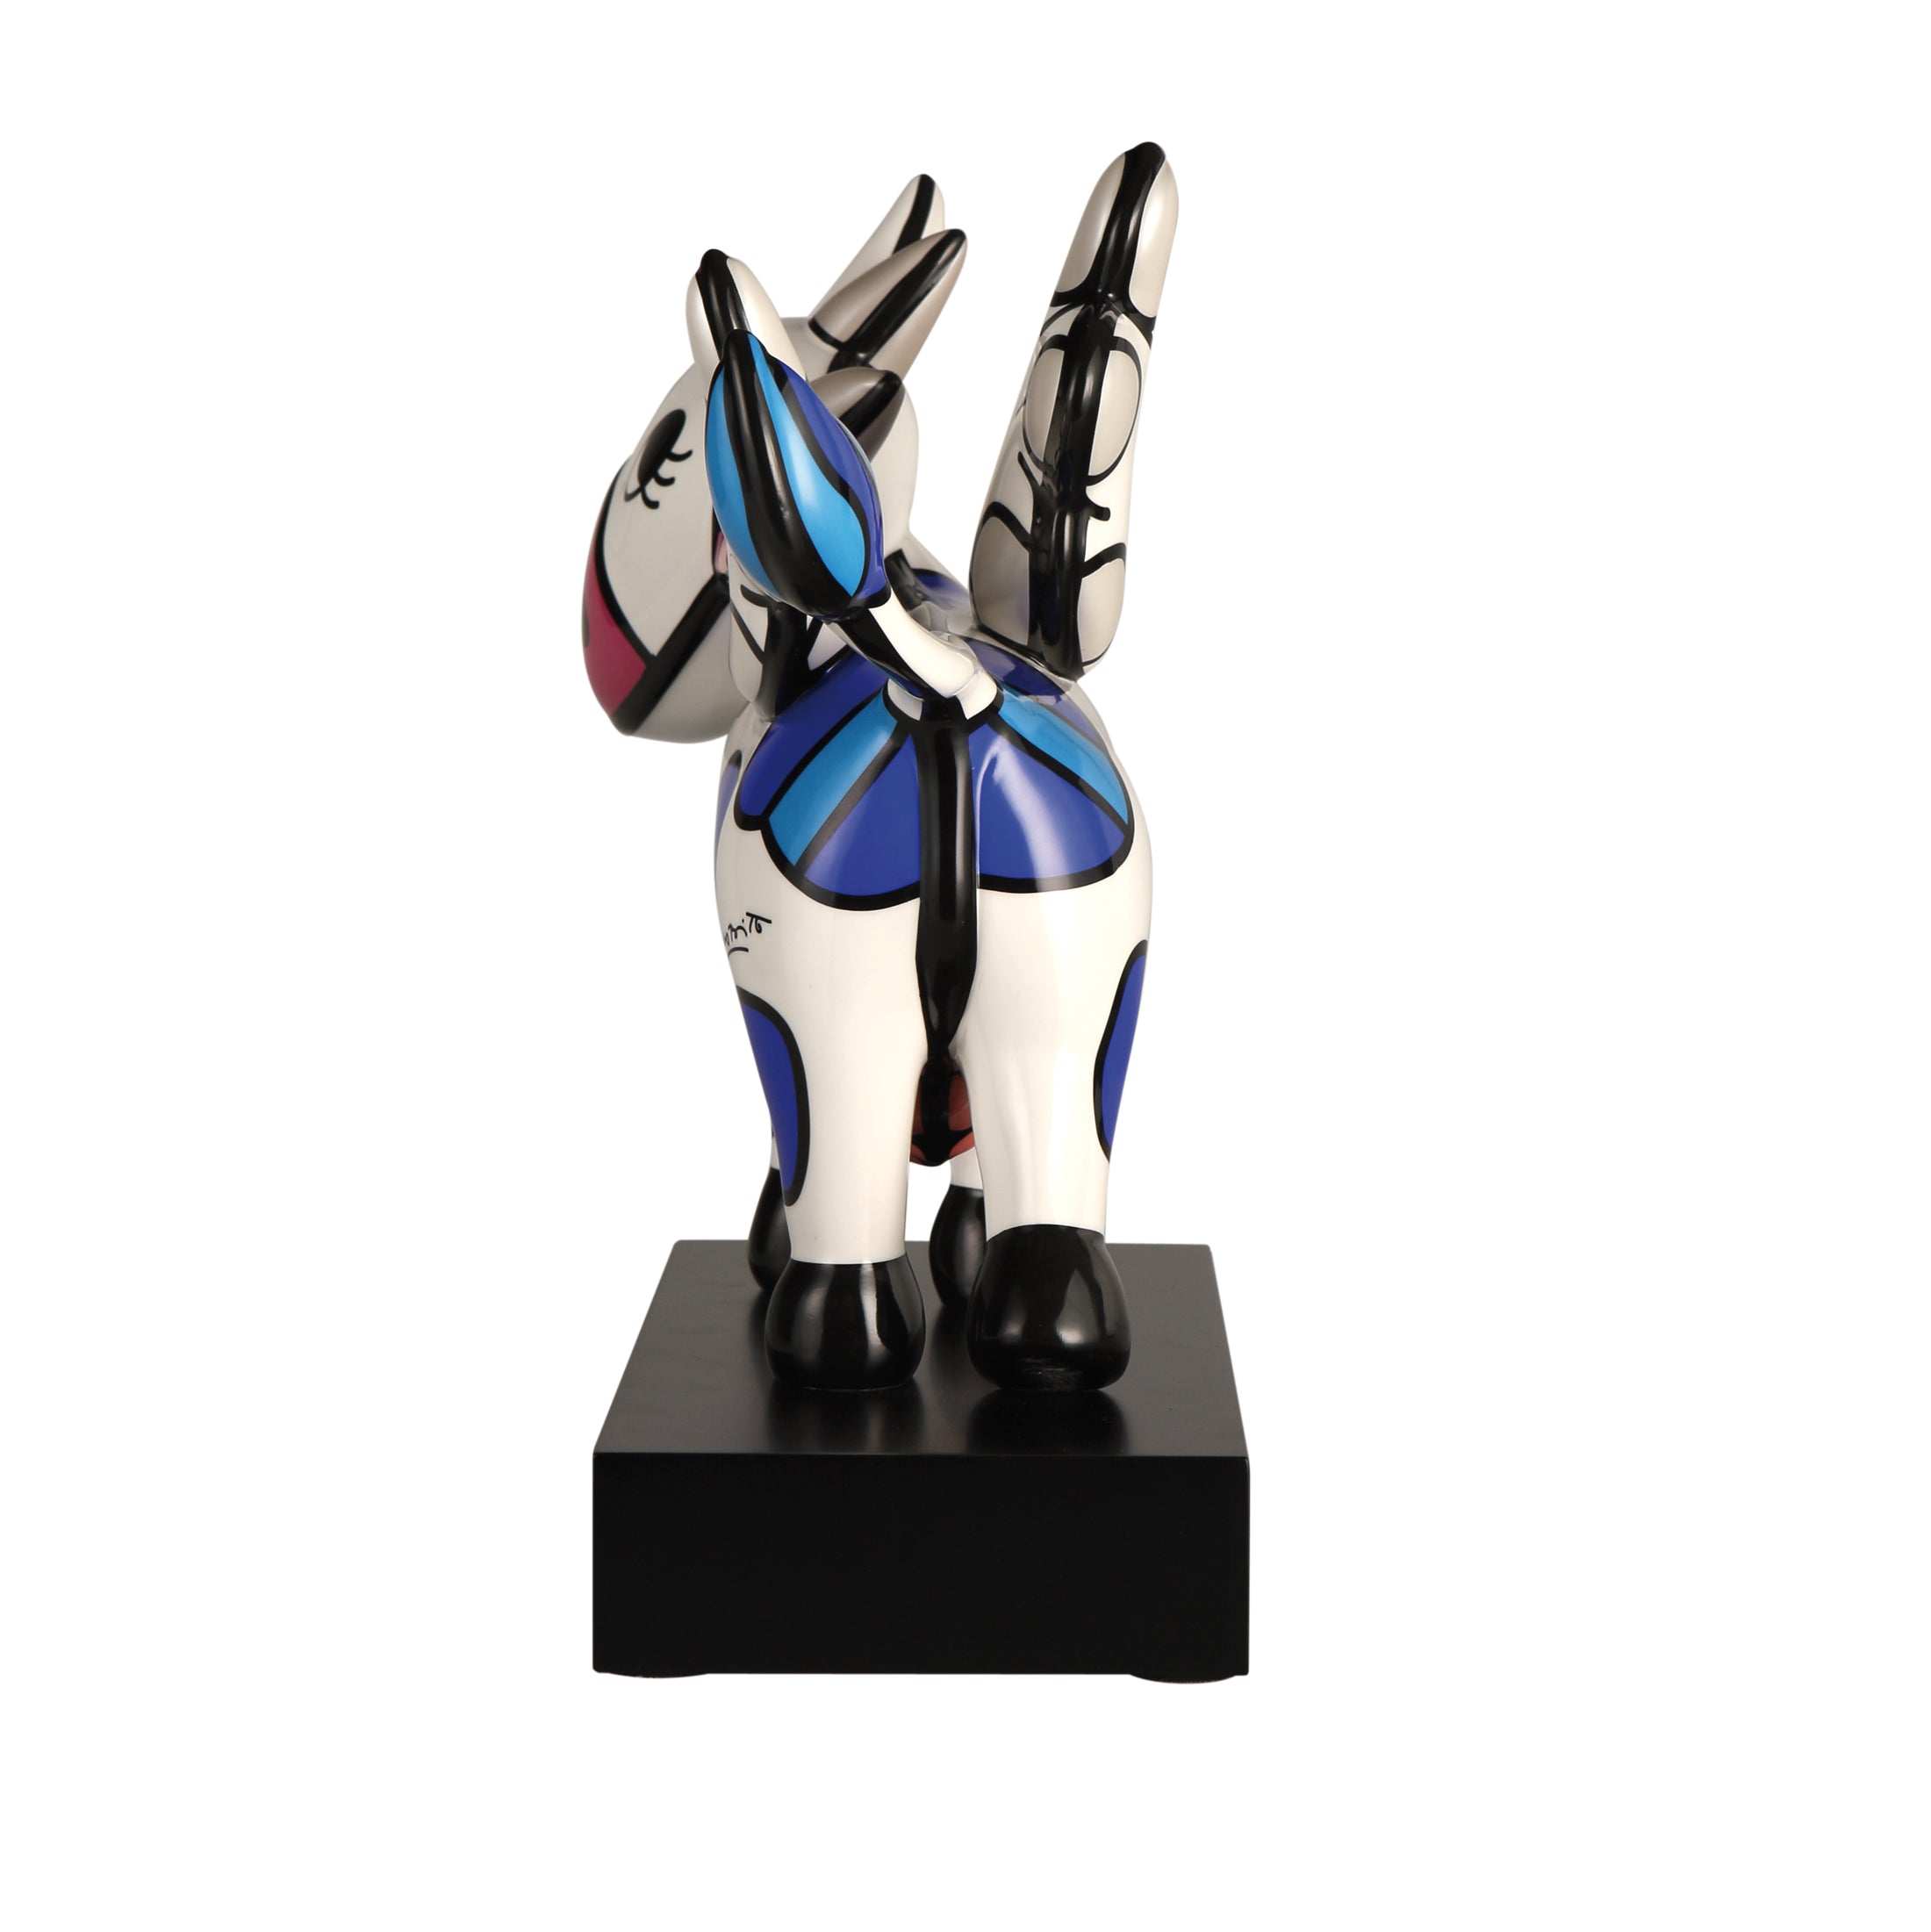 Goebel-by-Britto-Figur-Flying-Cow-limited-edition-berlindeluxe-kuh-blau-punkte